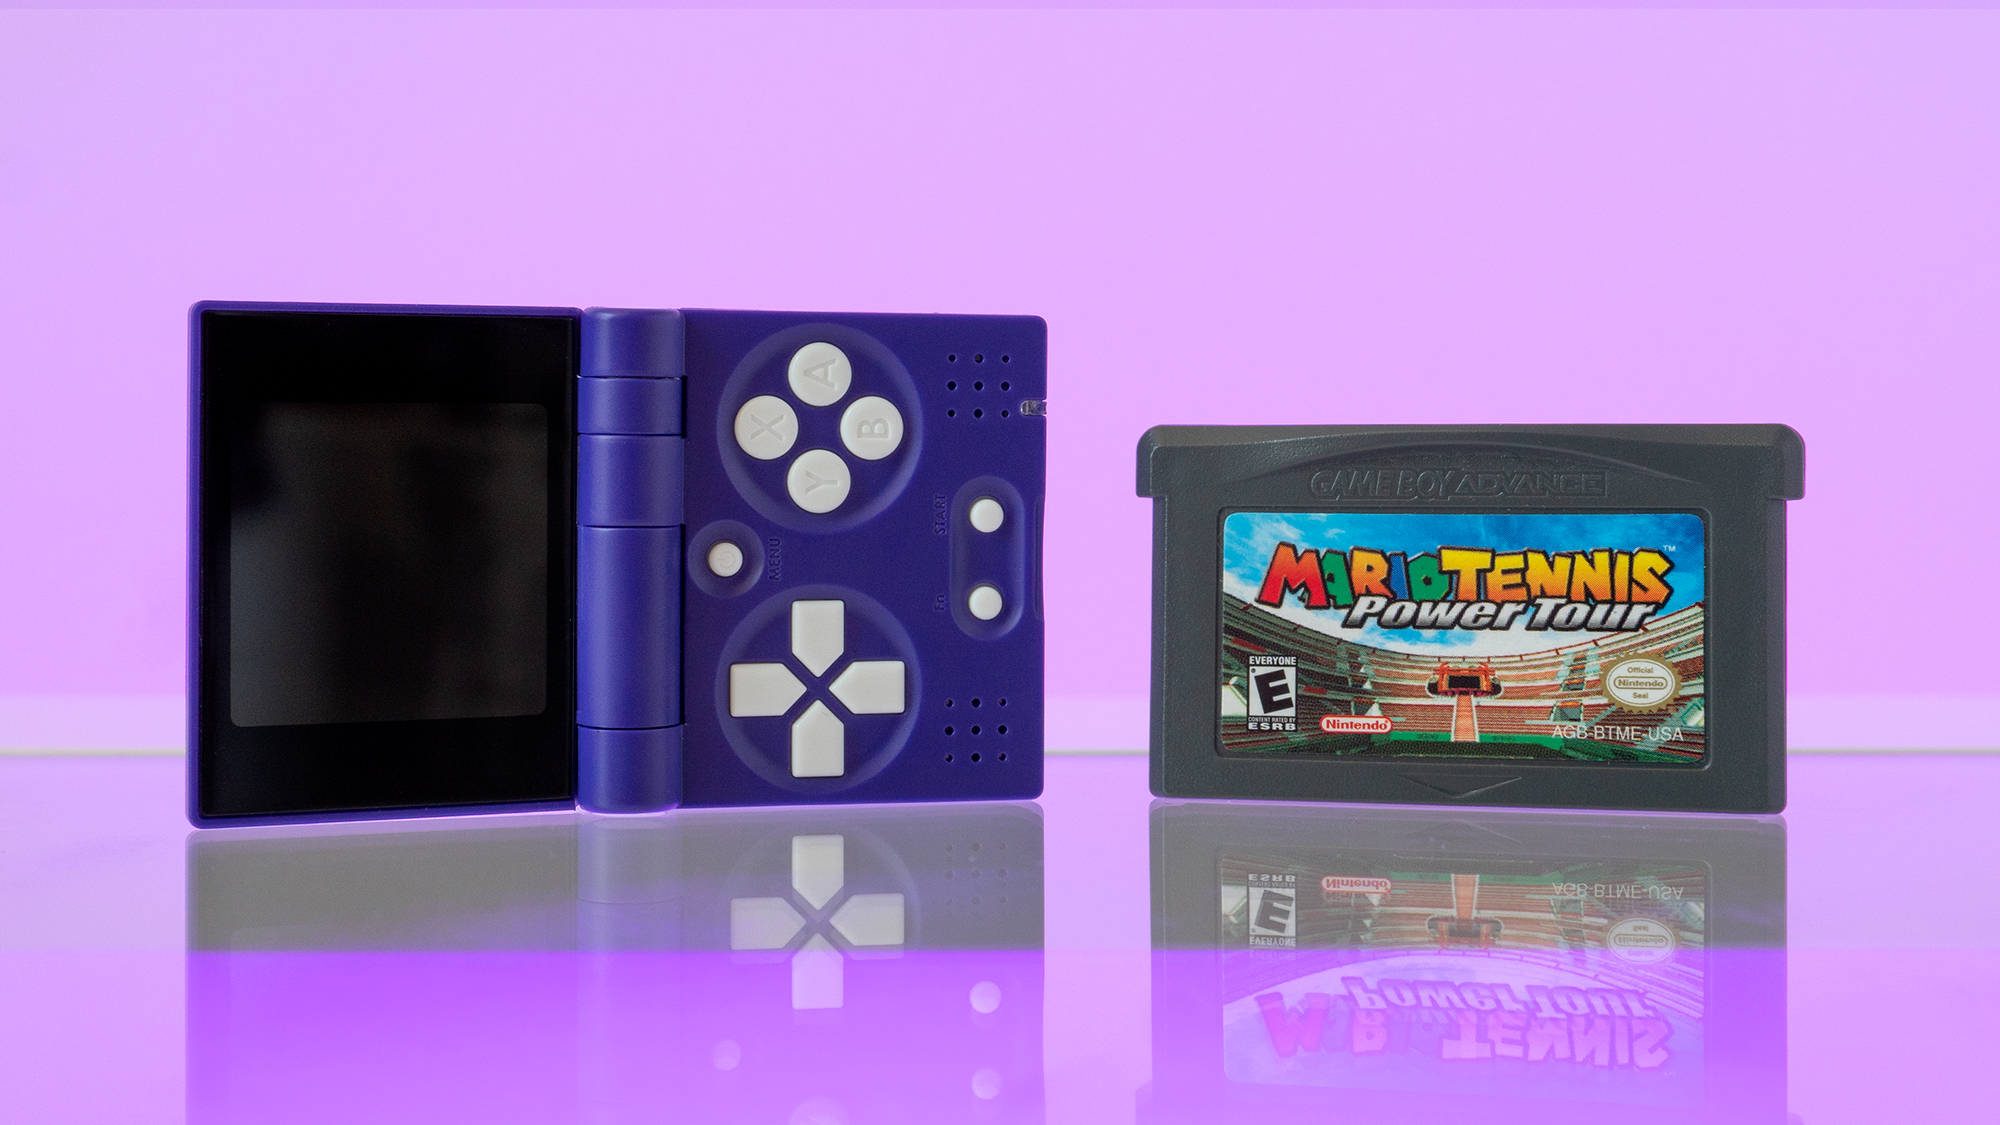 The FunKey S is smaller than a Game Boy Micro, and only just larger than a Game Boy Advance cartridge. (Photo: Andrew Liszewski/Gizmodo)